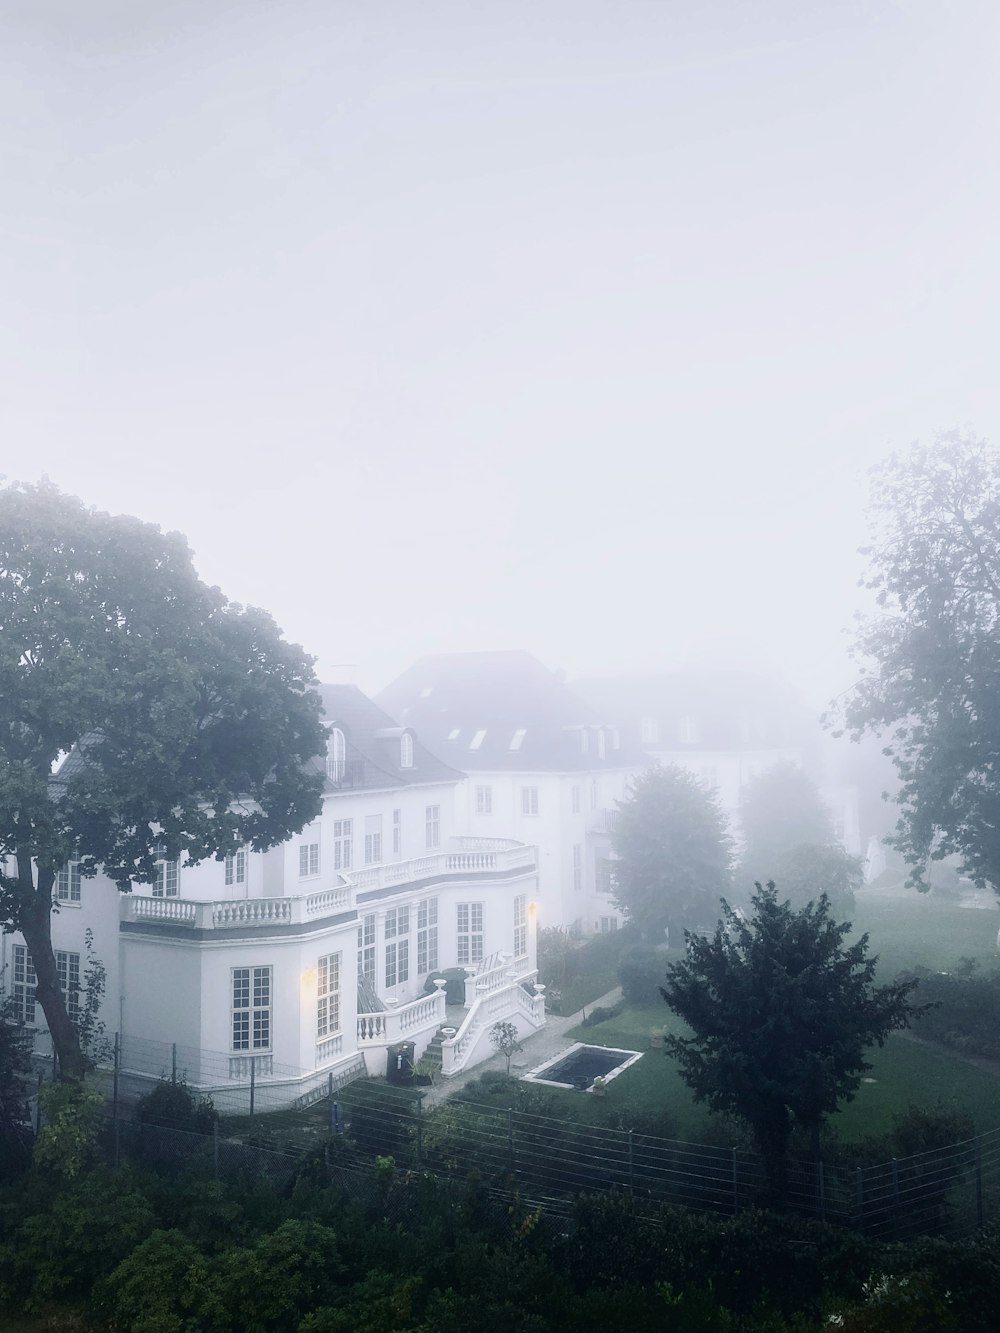 a large white house surrounded by trees on a foggy day